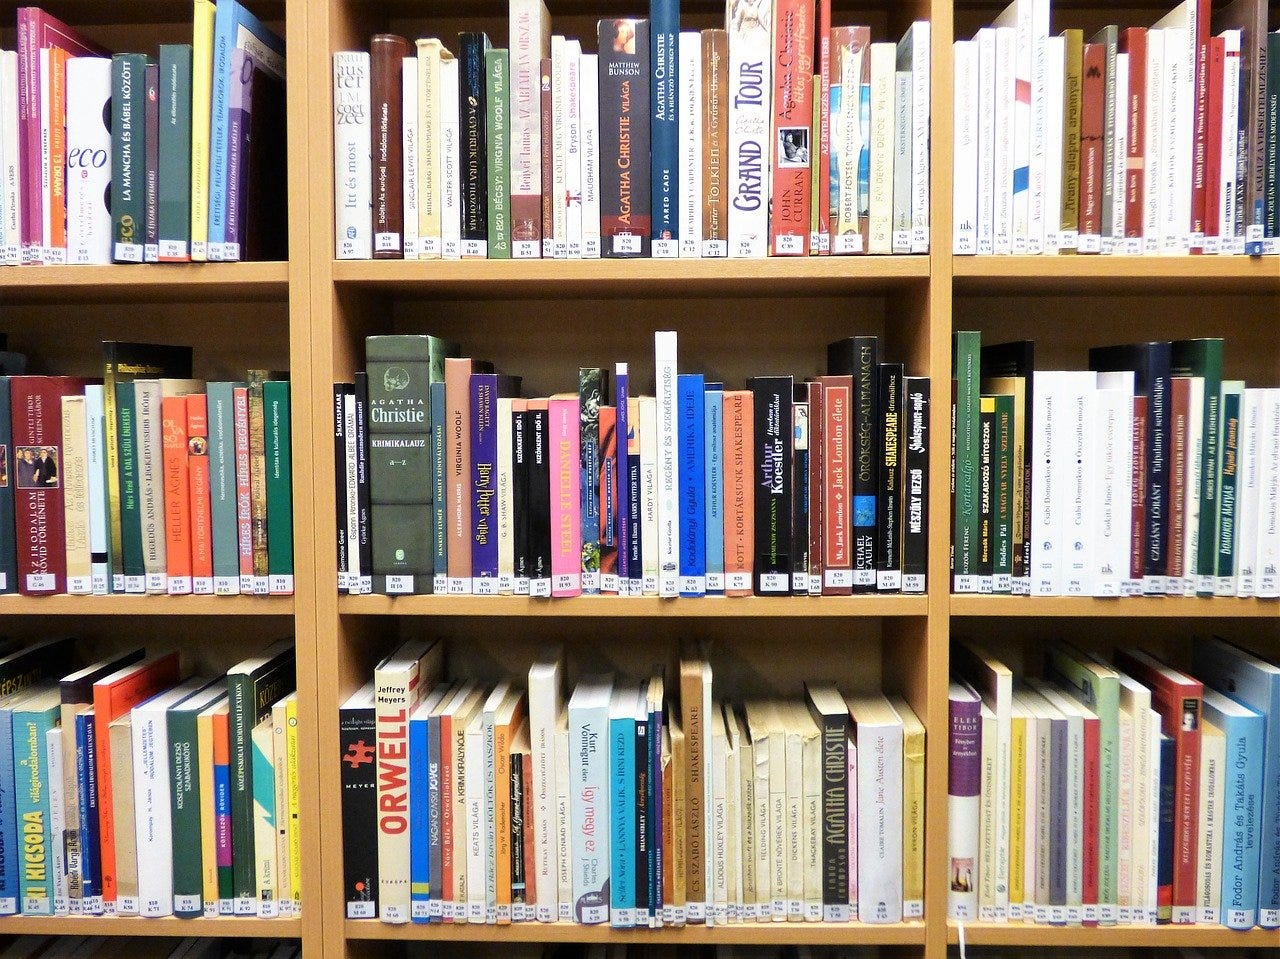 a bookshelf filled to the brim with books of all different colors, sizes, and genres